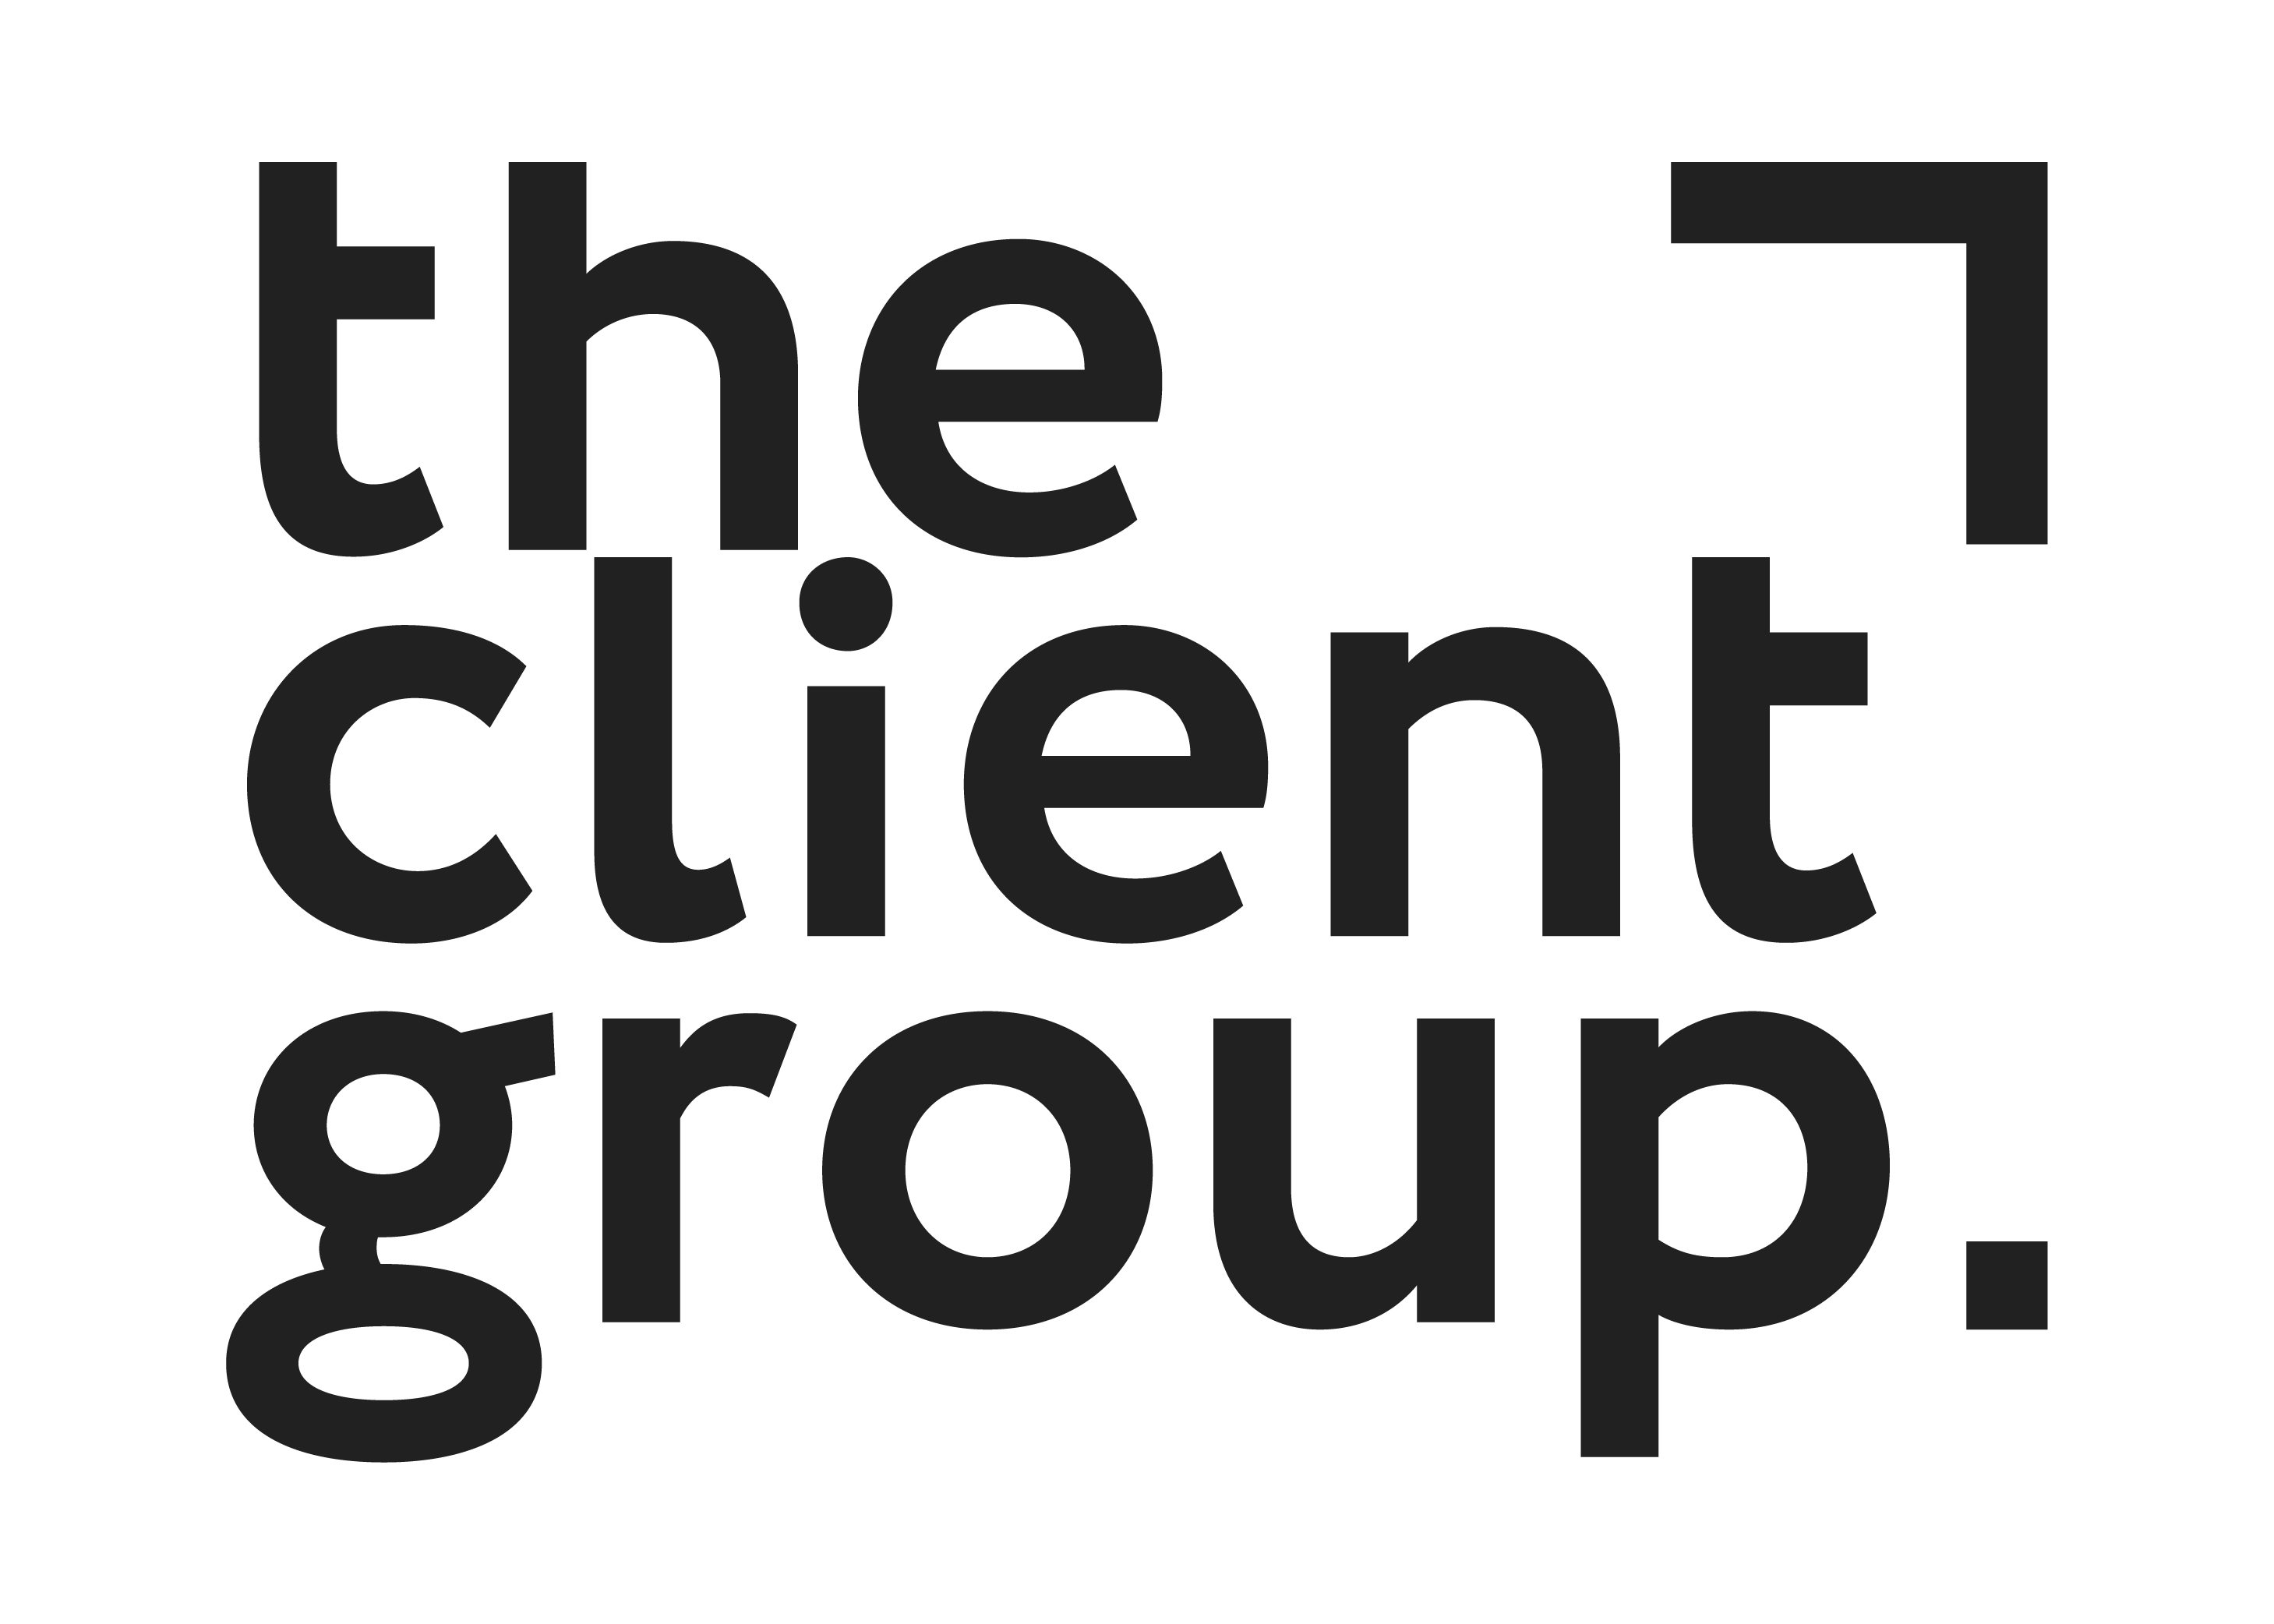 Logo The client group